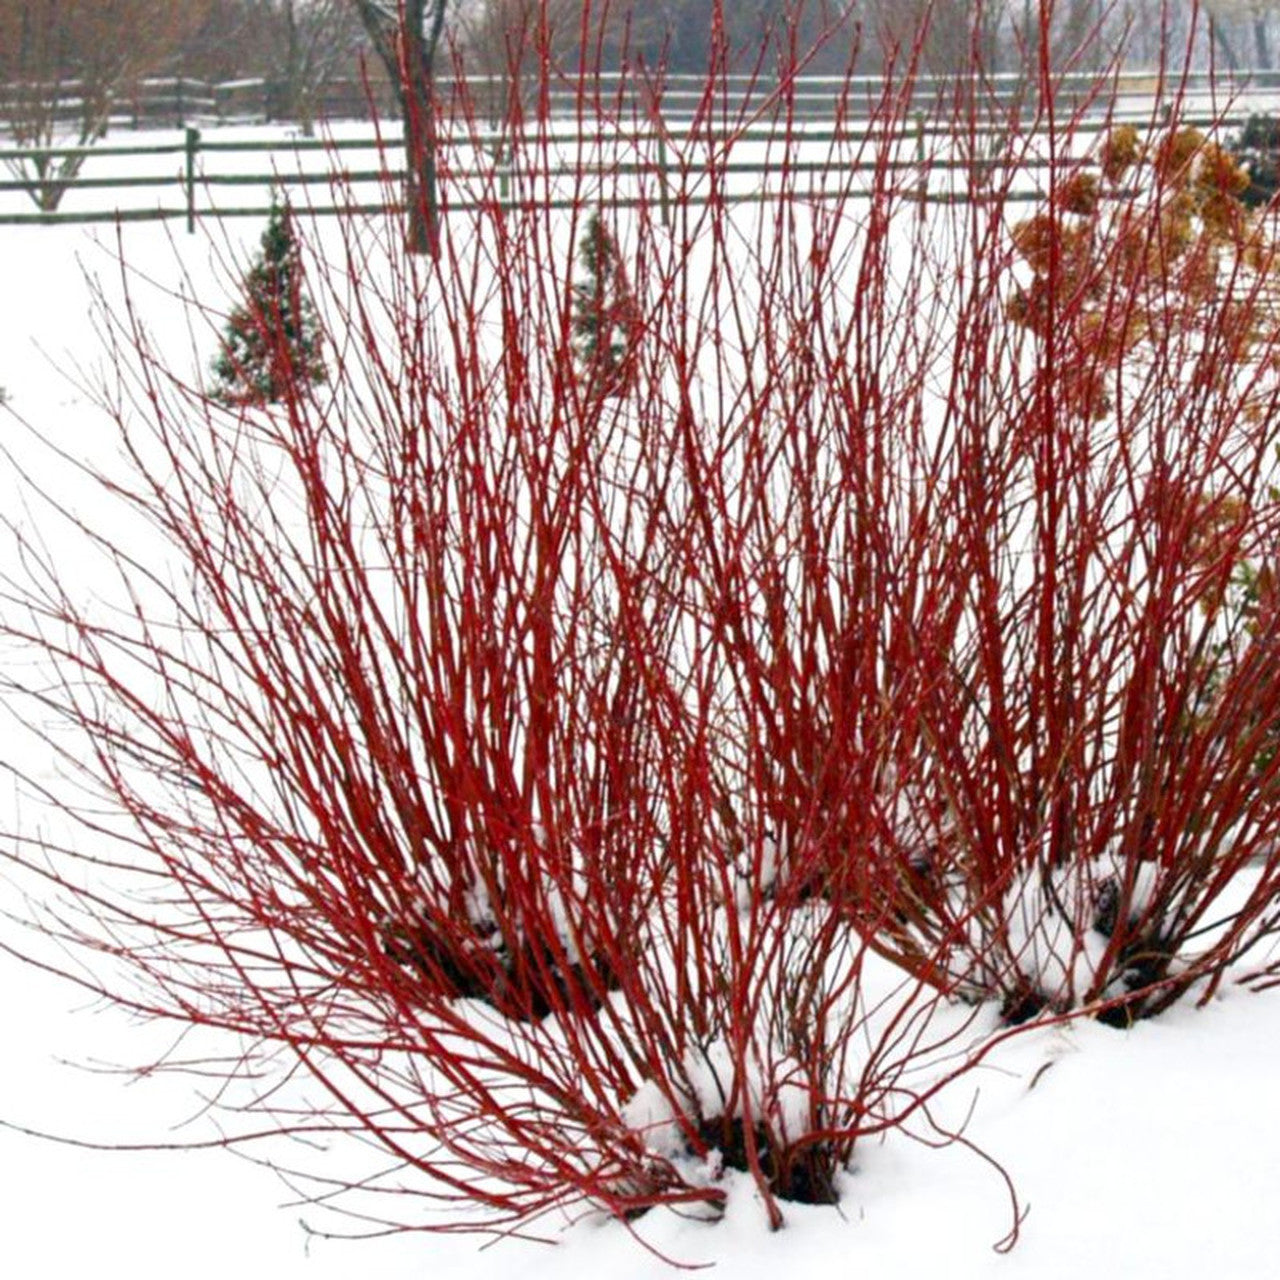 Red Twig Dogwood Tree, Coral Red Bark